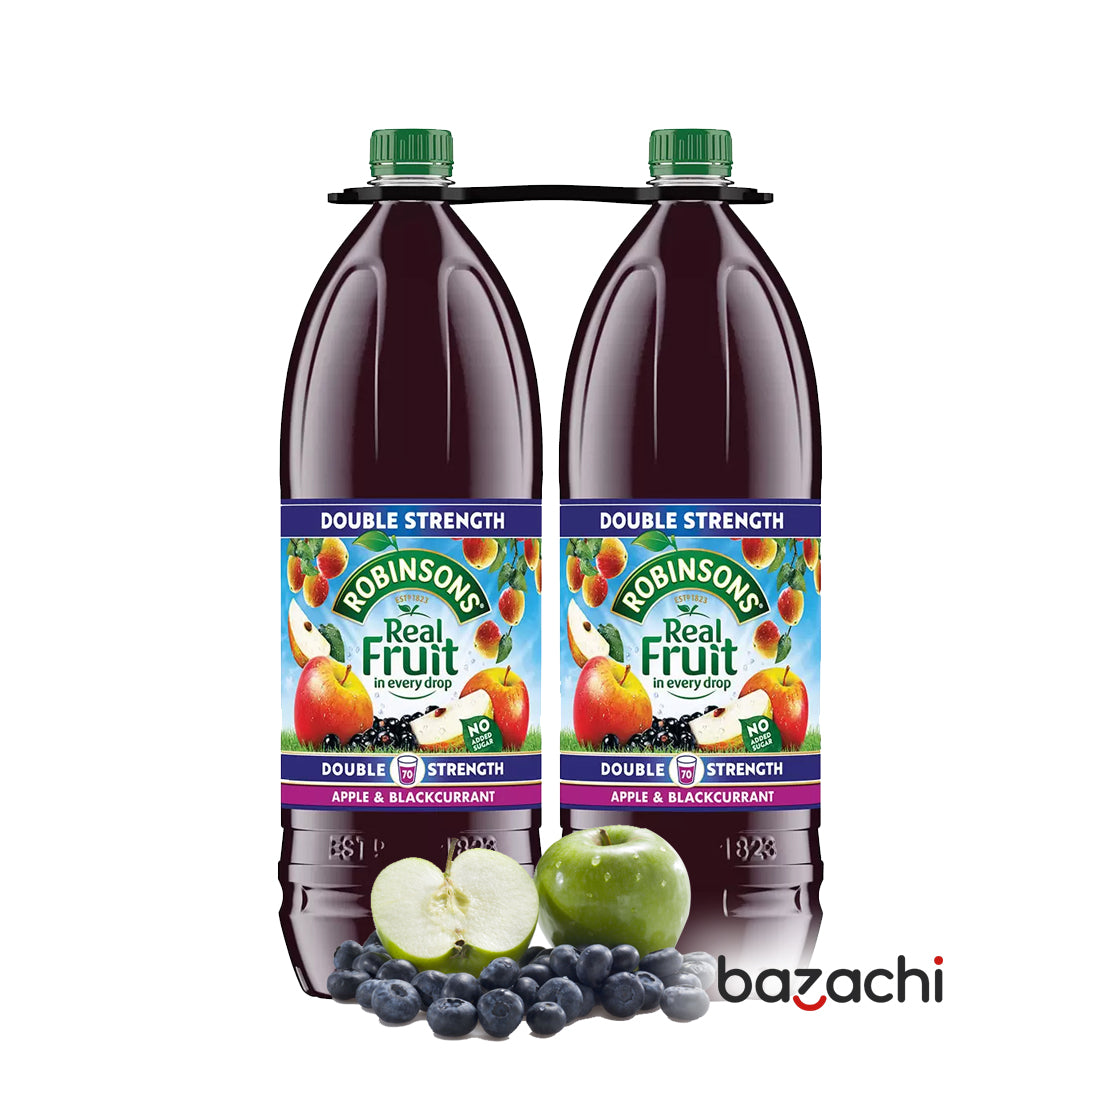 Robinsons Real Fruit Double Strength Apple & Blackcurrant Squash 1.75L